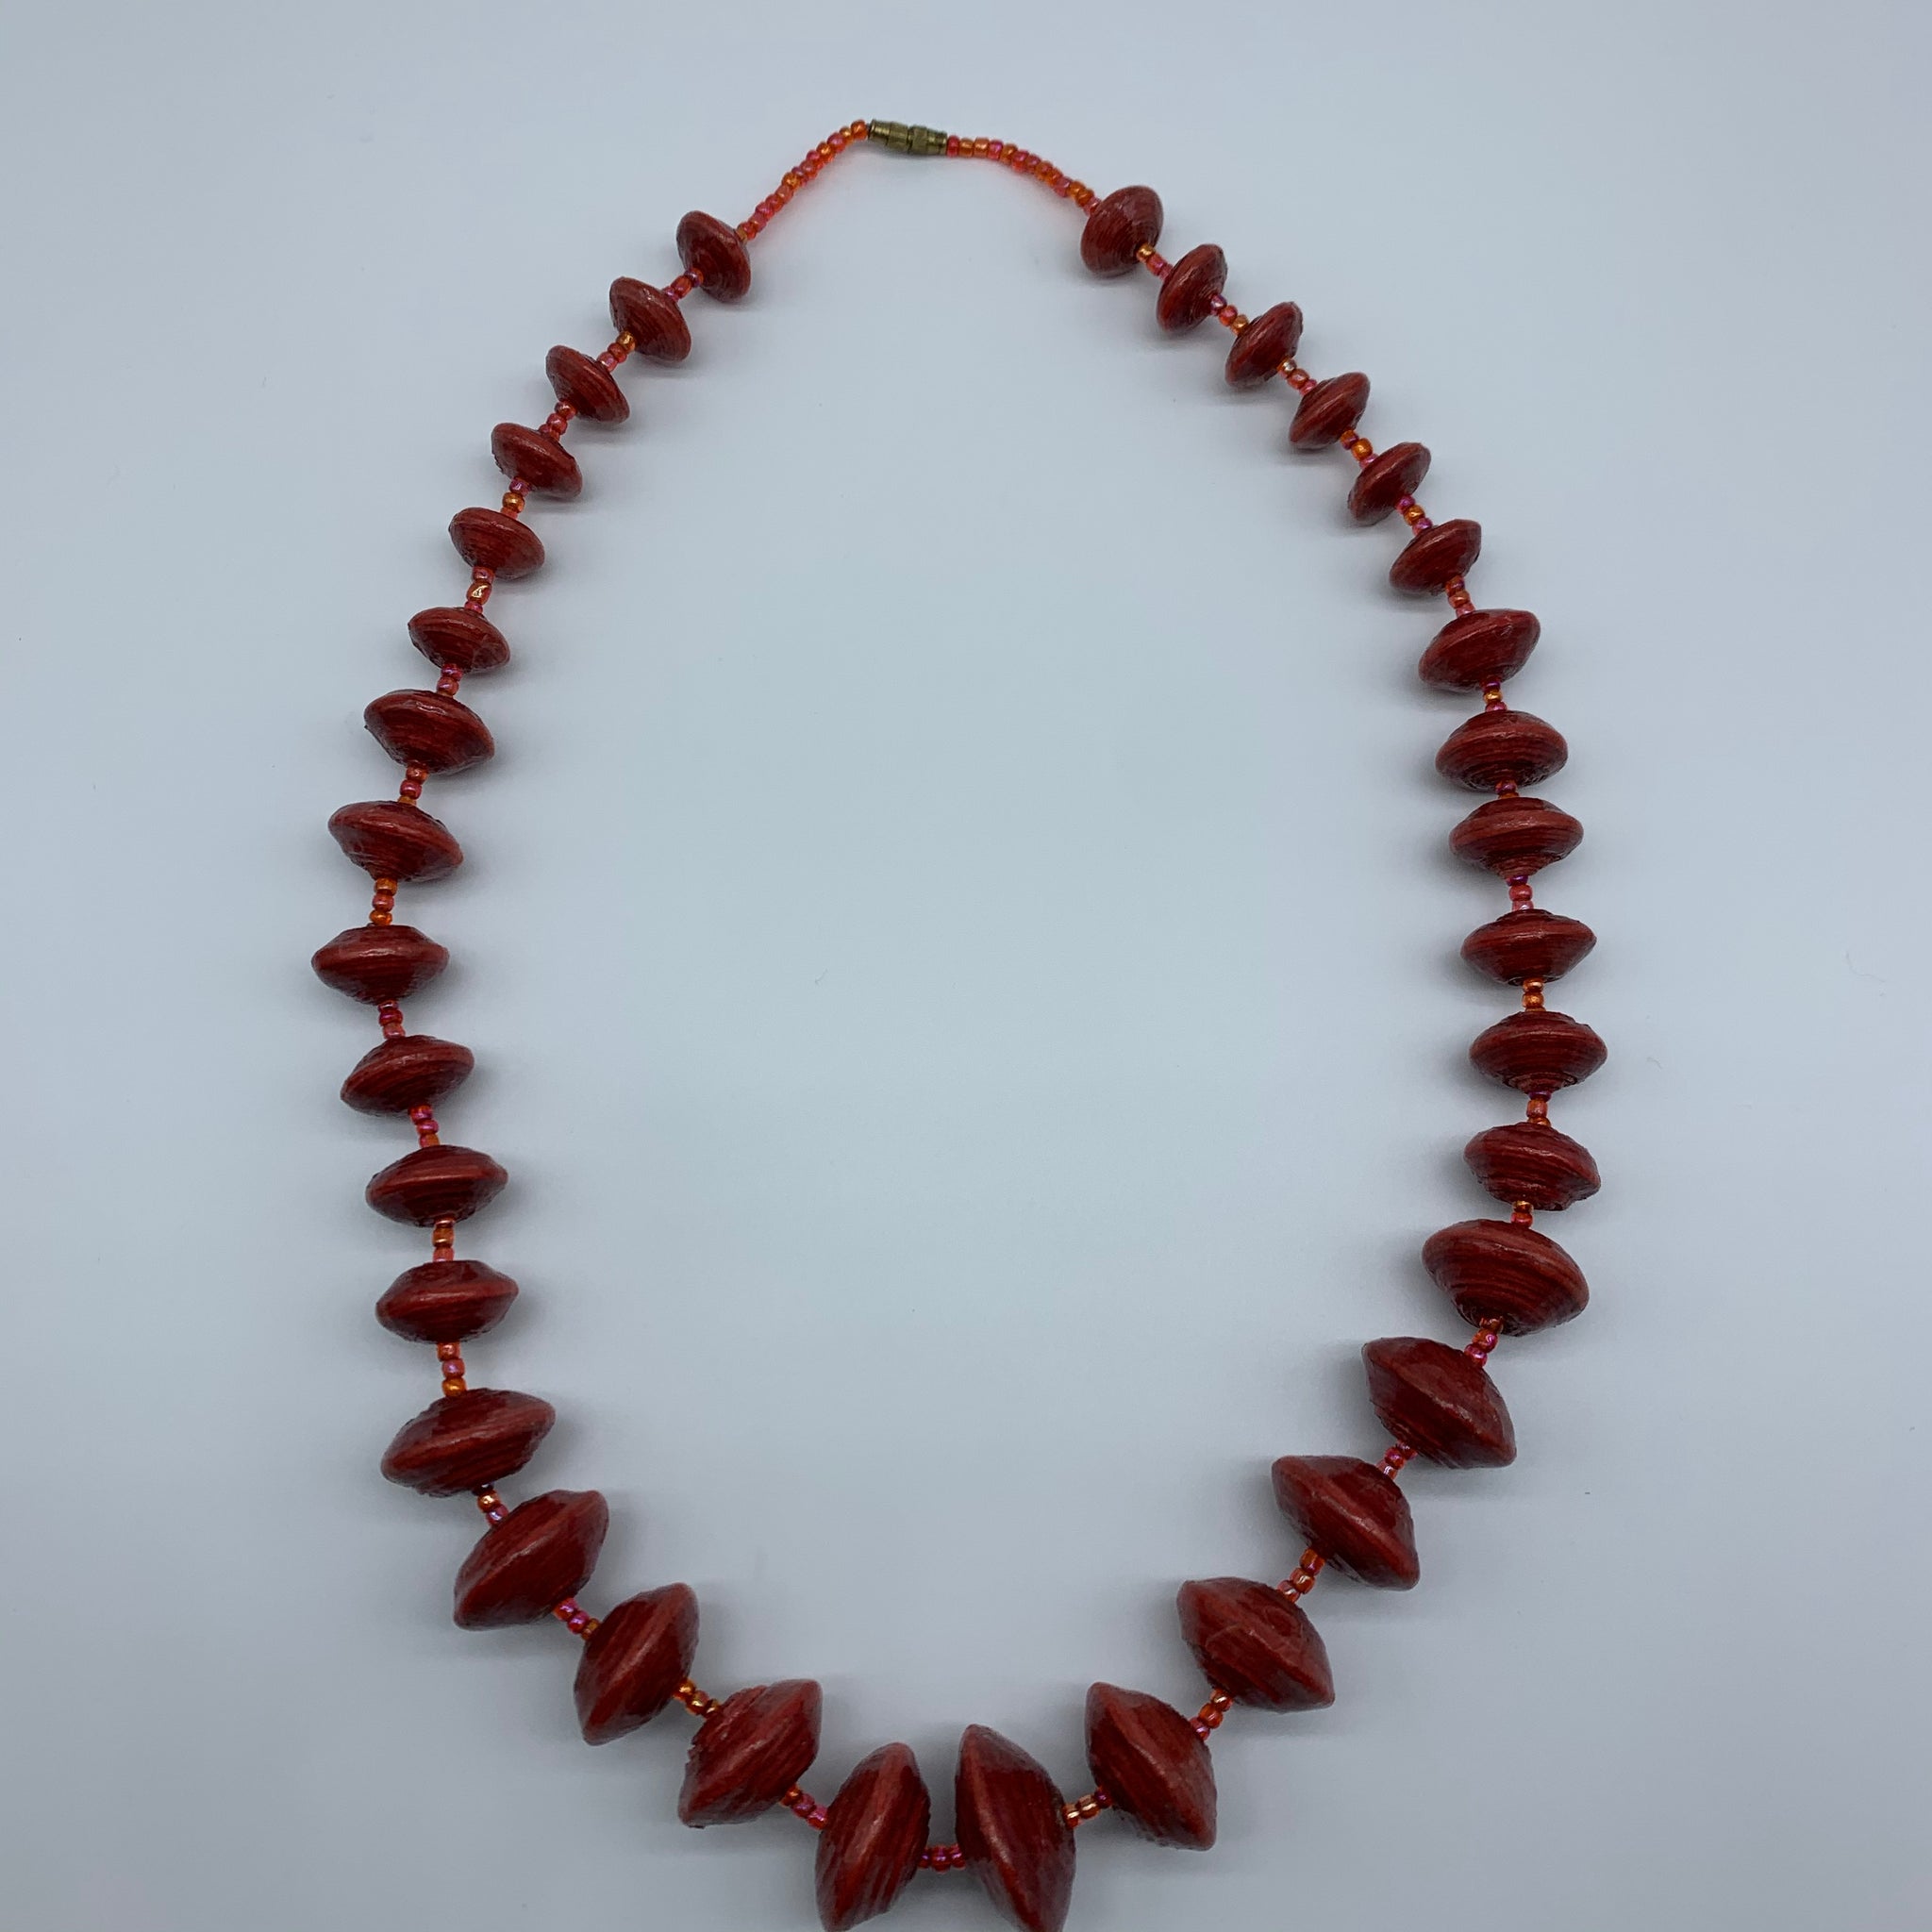 Recycled Paper Necklace with Beads-Red Variation - Lillon Boutique